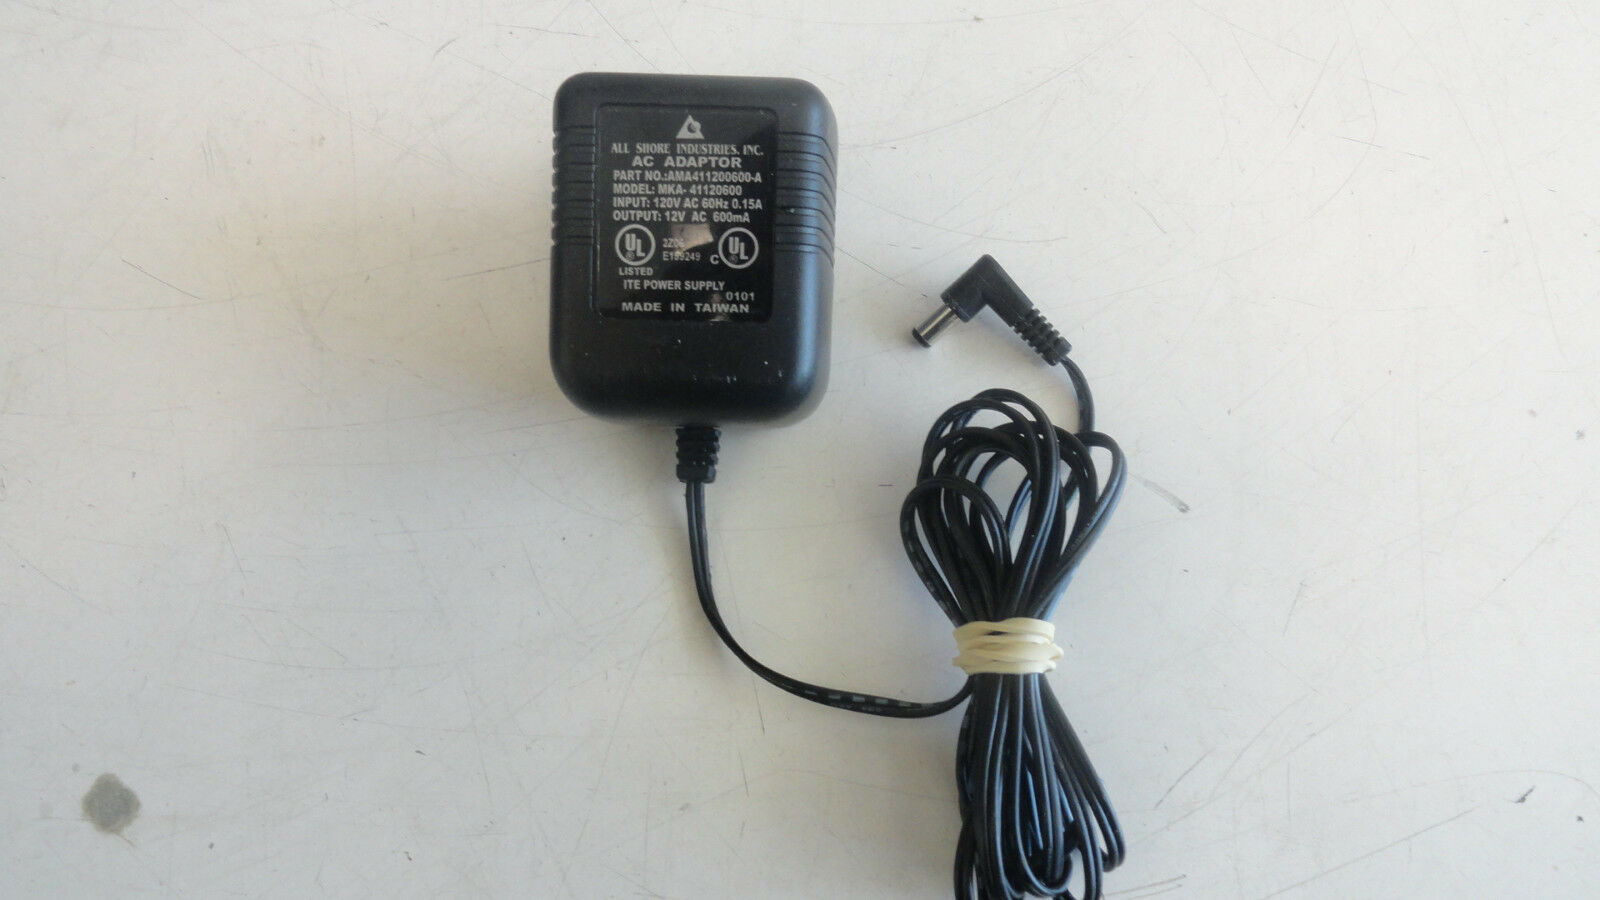 BB2: Genuine All Shores MKA-41120600 Charger Adapter Power Supply Brand: All Shores Type: Power Adapter Compatibl